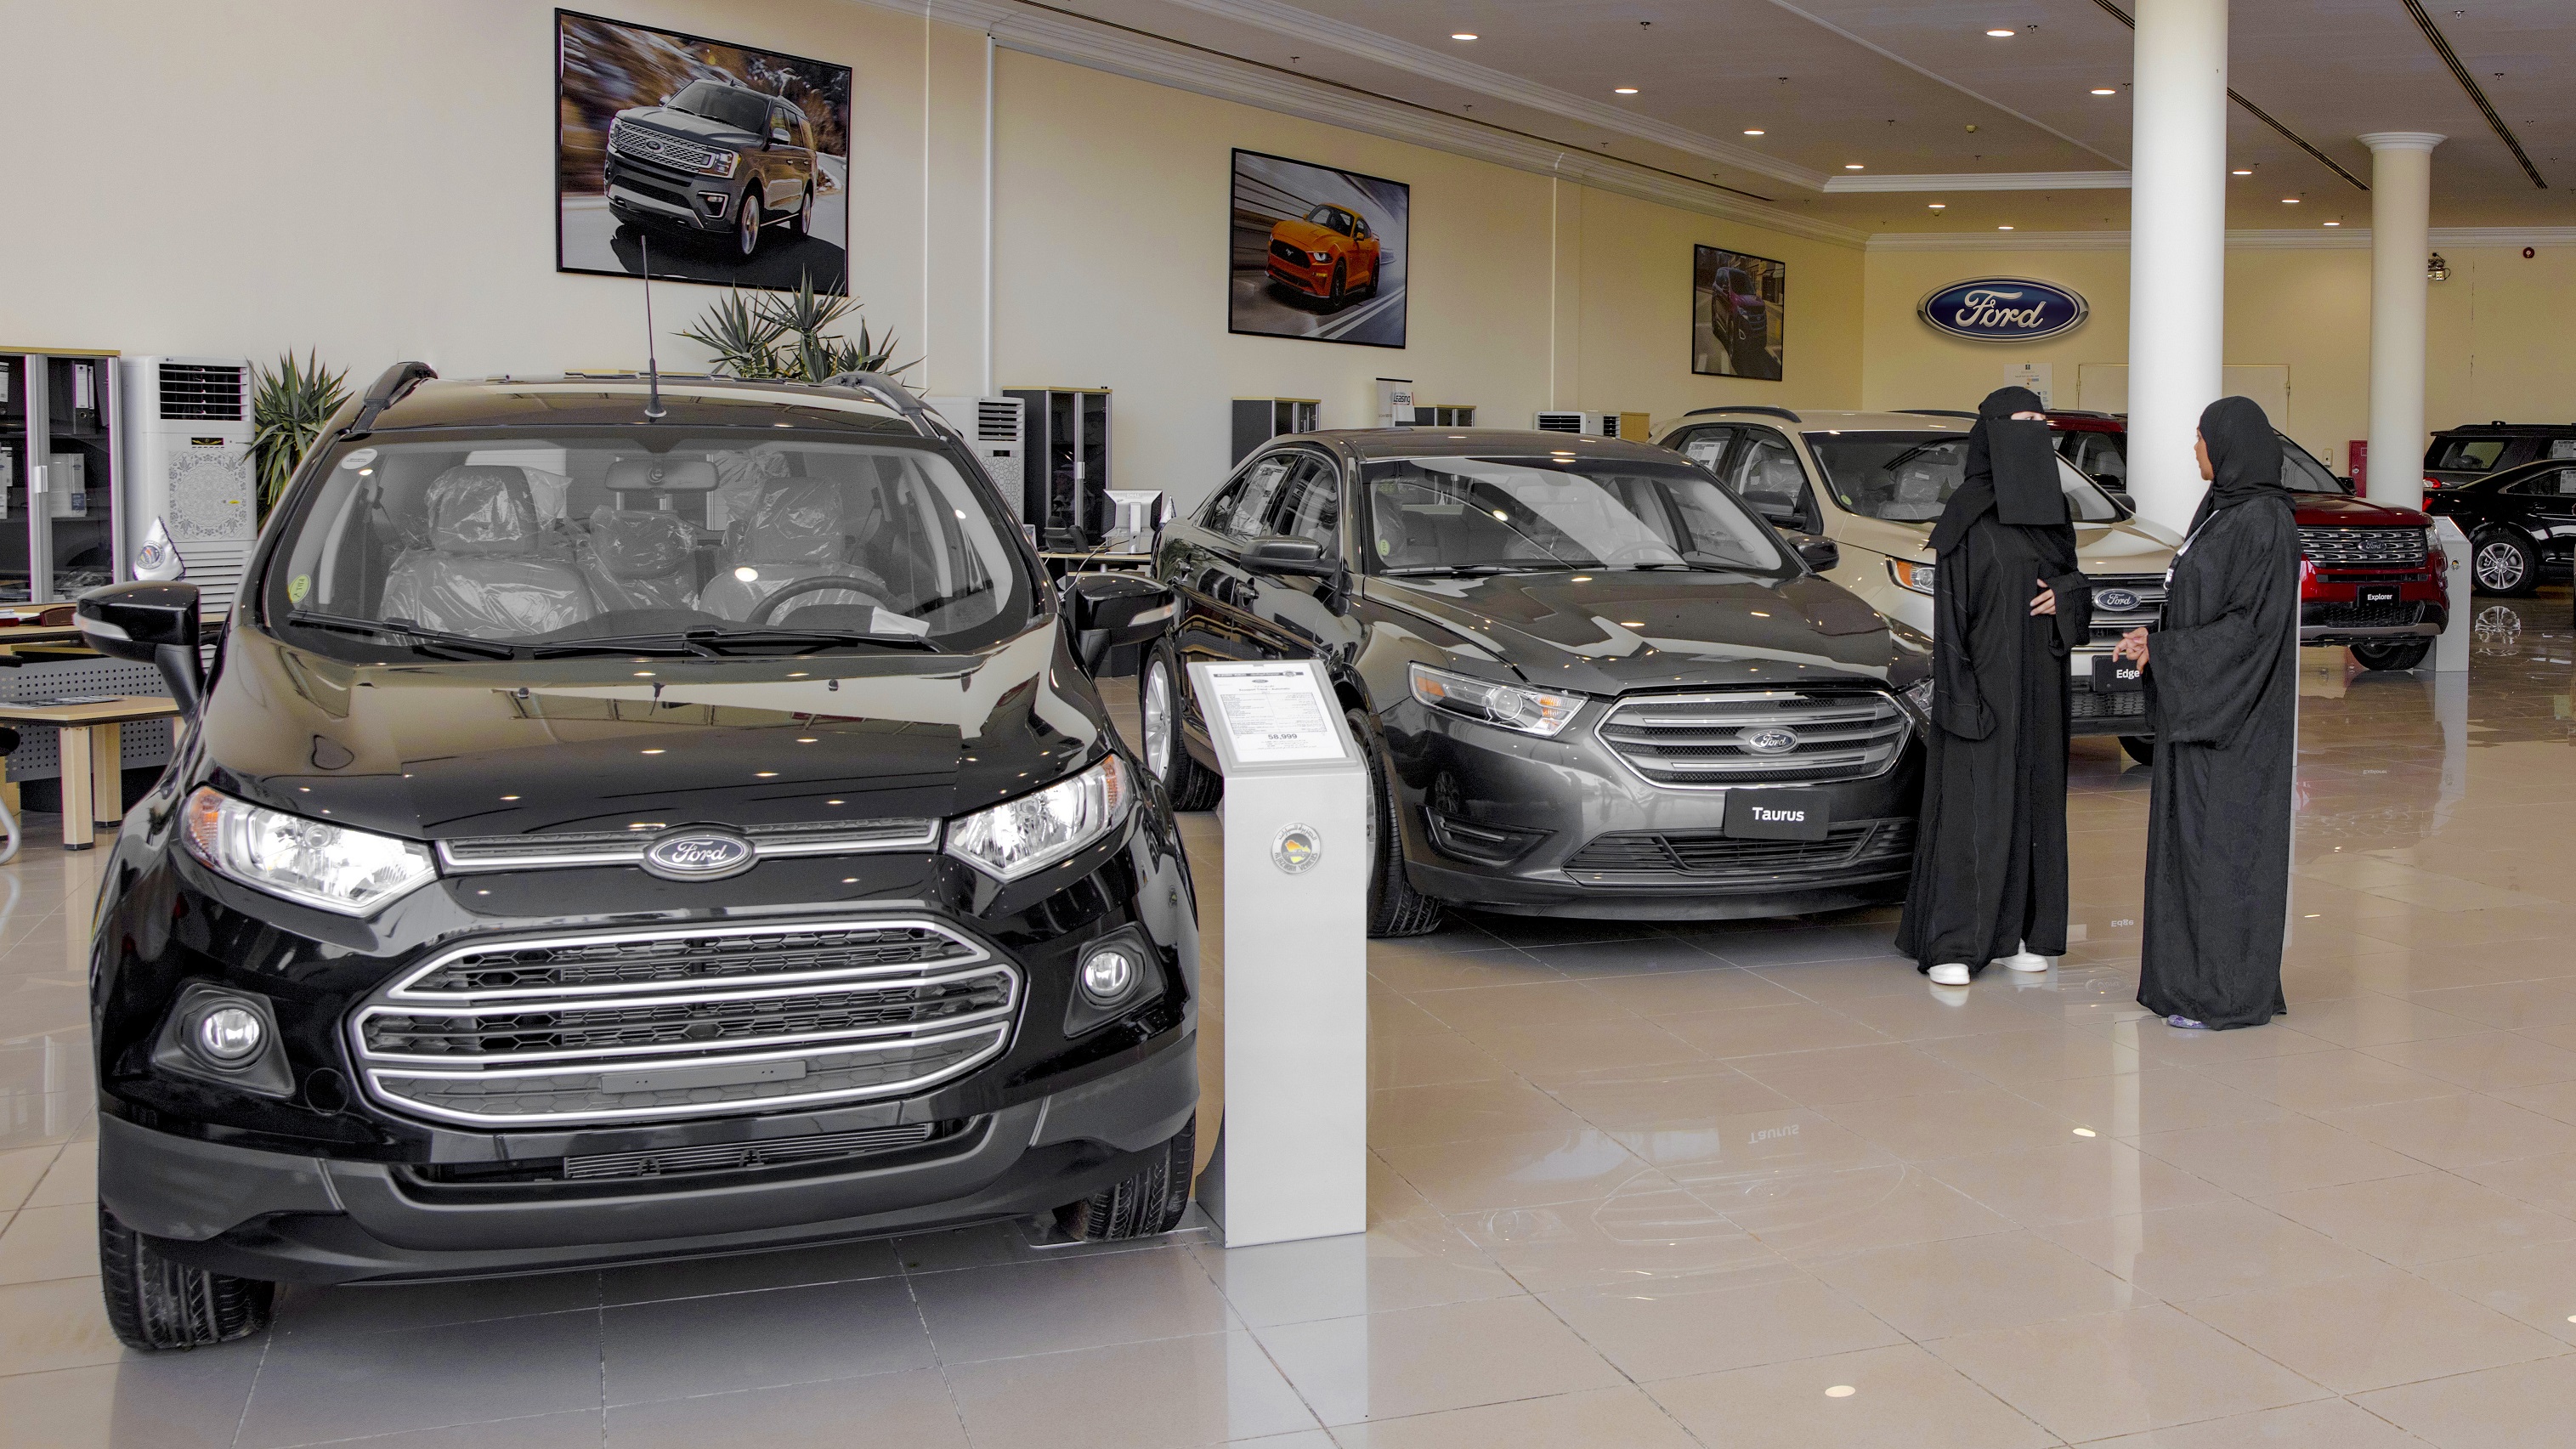 Lincoln and Ford Dealer in Saudi Upgrades Riyadh Facility to Welcome Female Customers